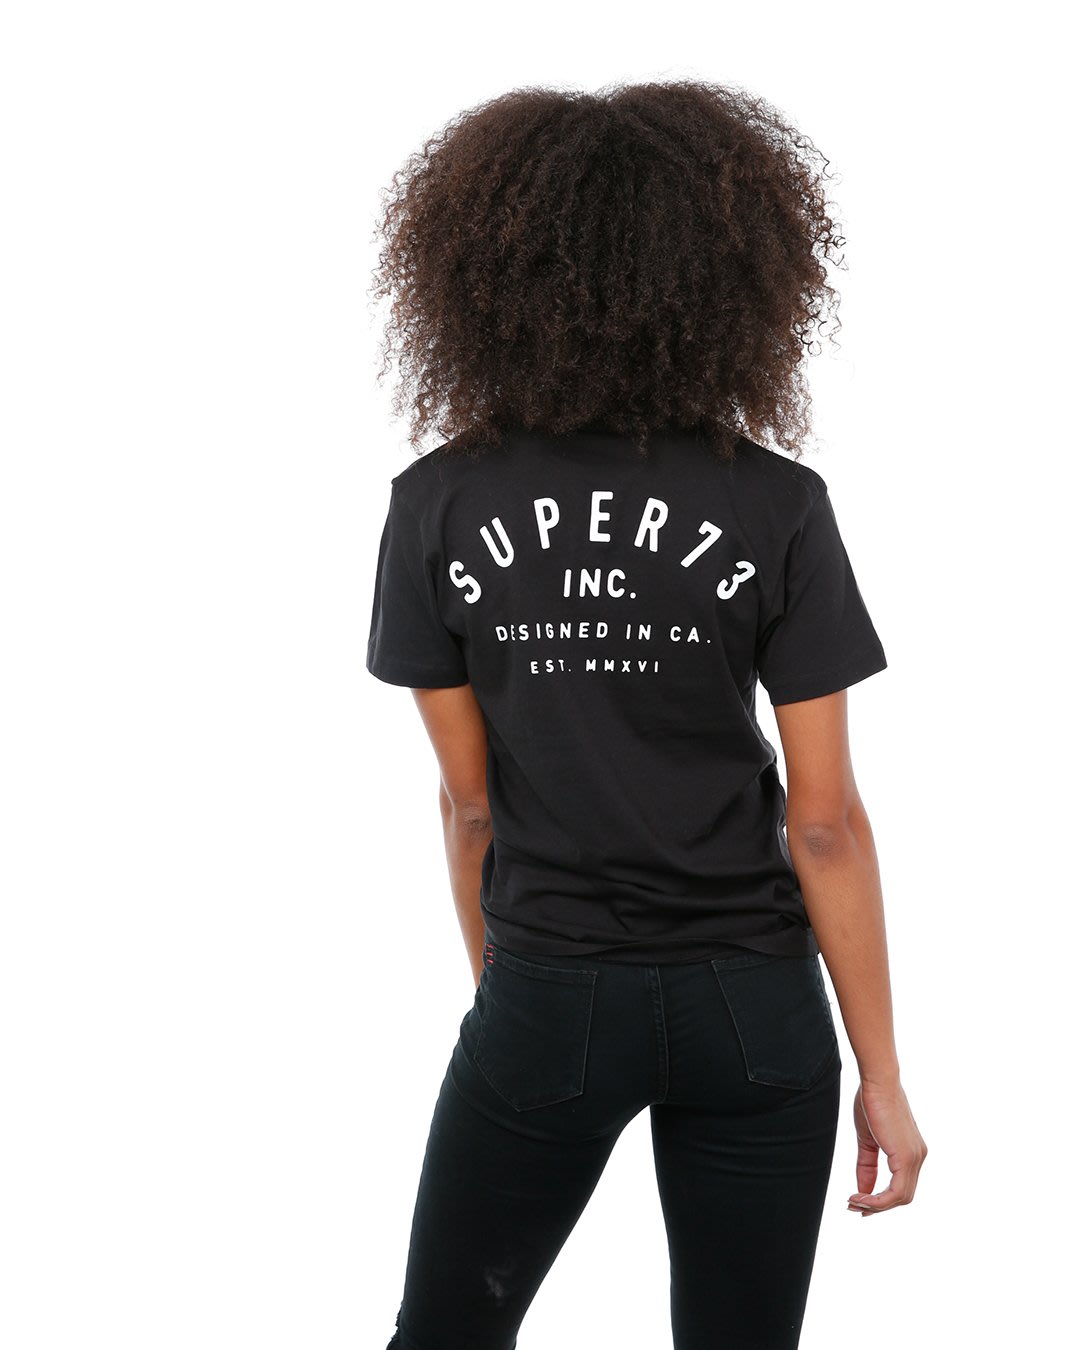 Back view of female model in Black Classic Short Sleeve T-Shirt on white background.